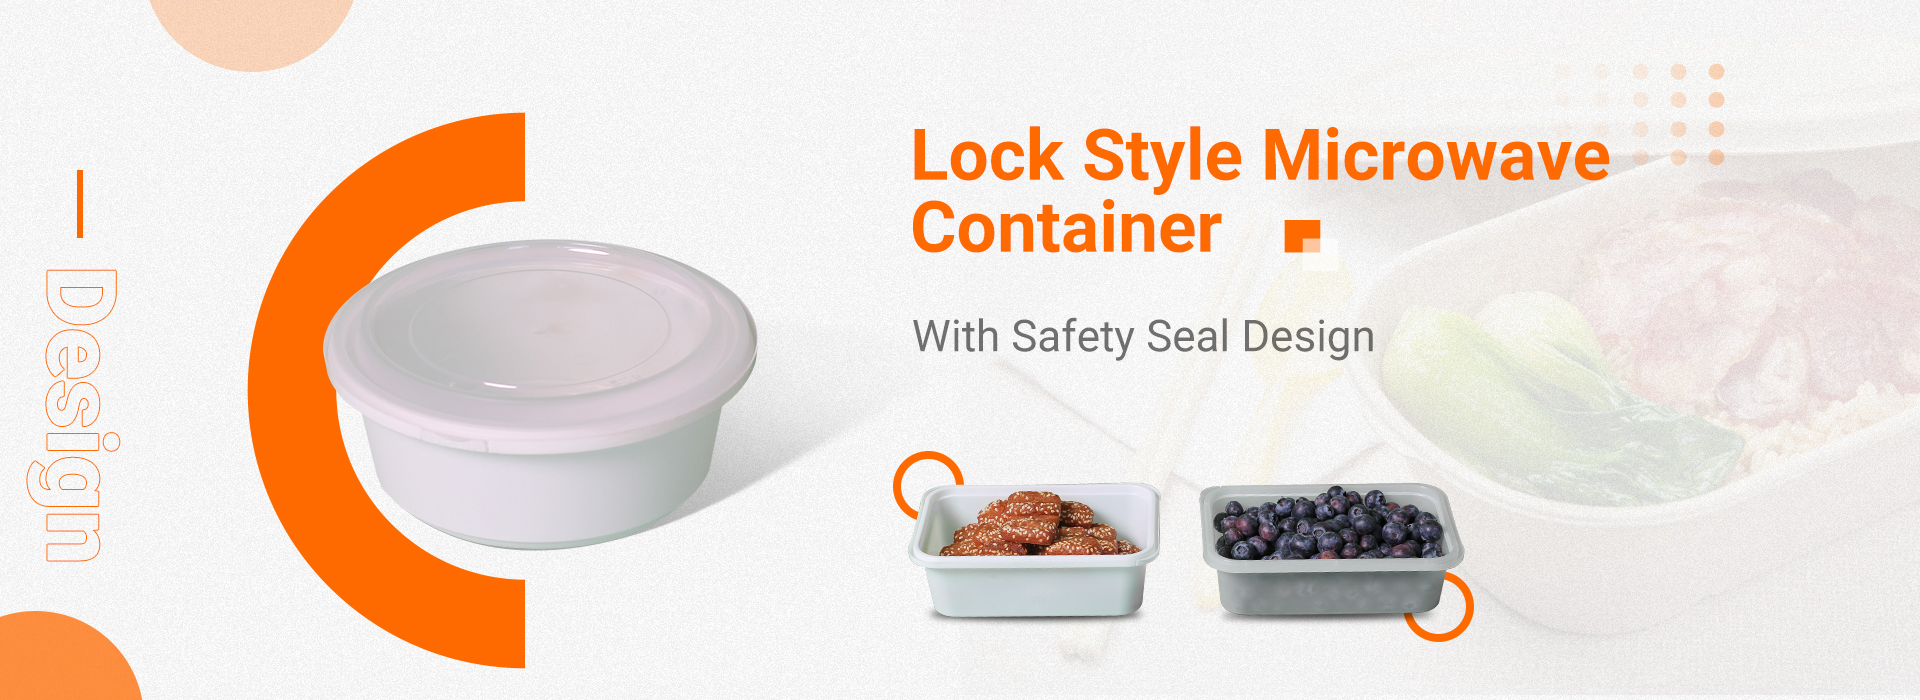 Round Containers, Pp Injection Containers, Thermo Formed Containers - OMY